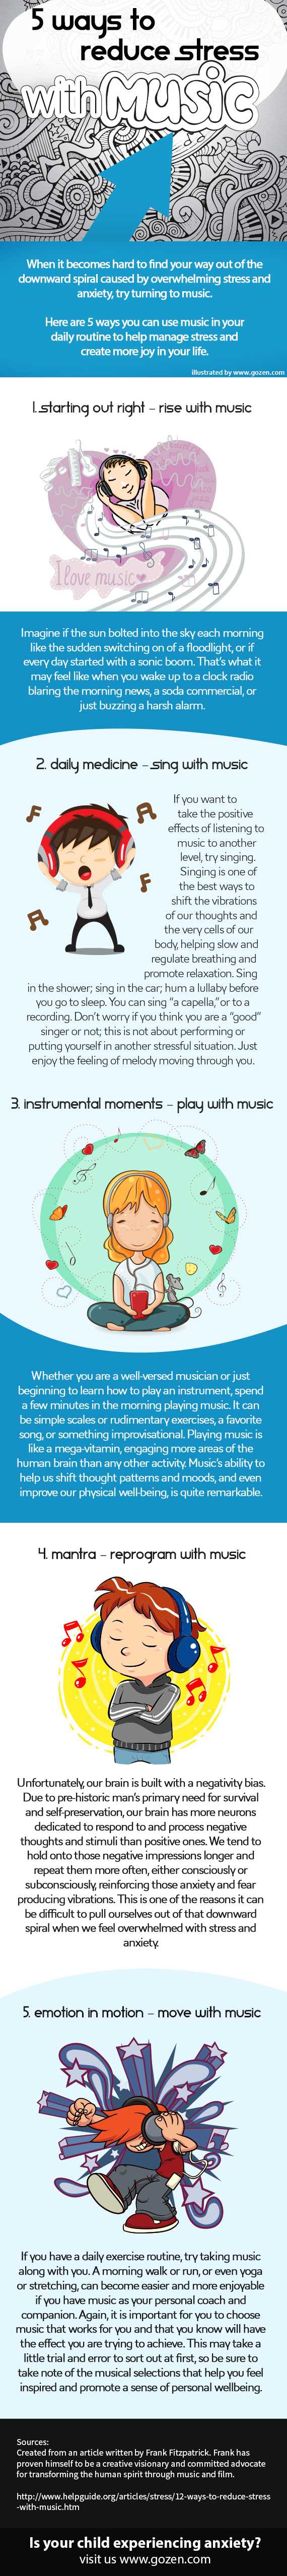 5 Ways To Reduce Stress And Anxiety With Music